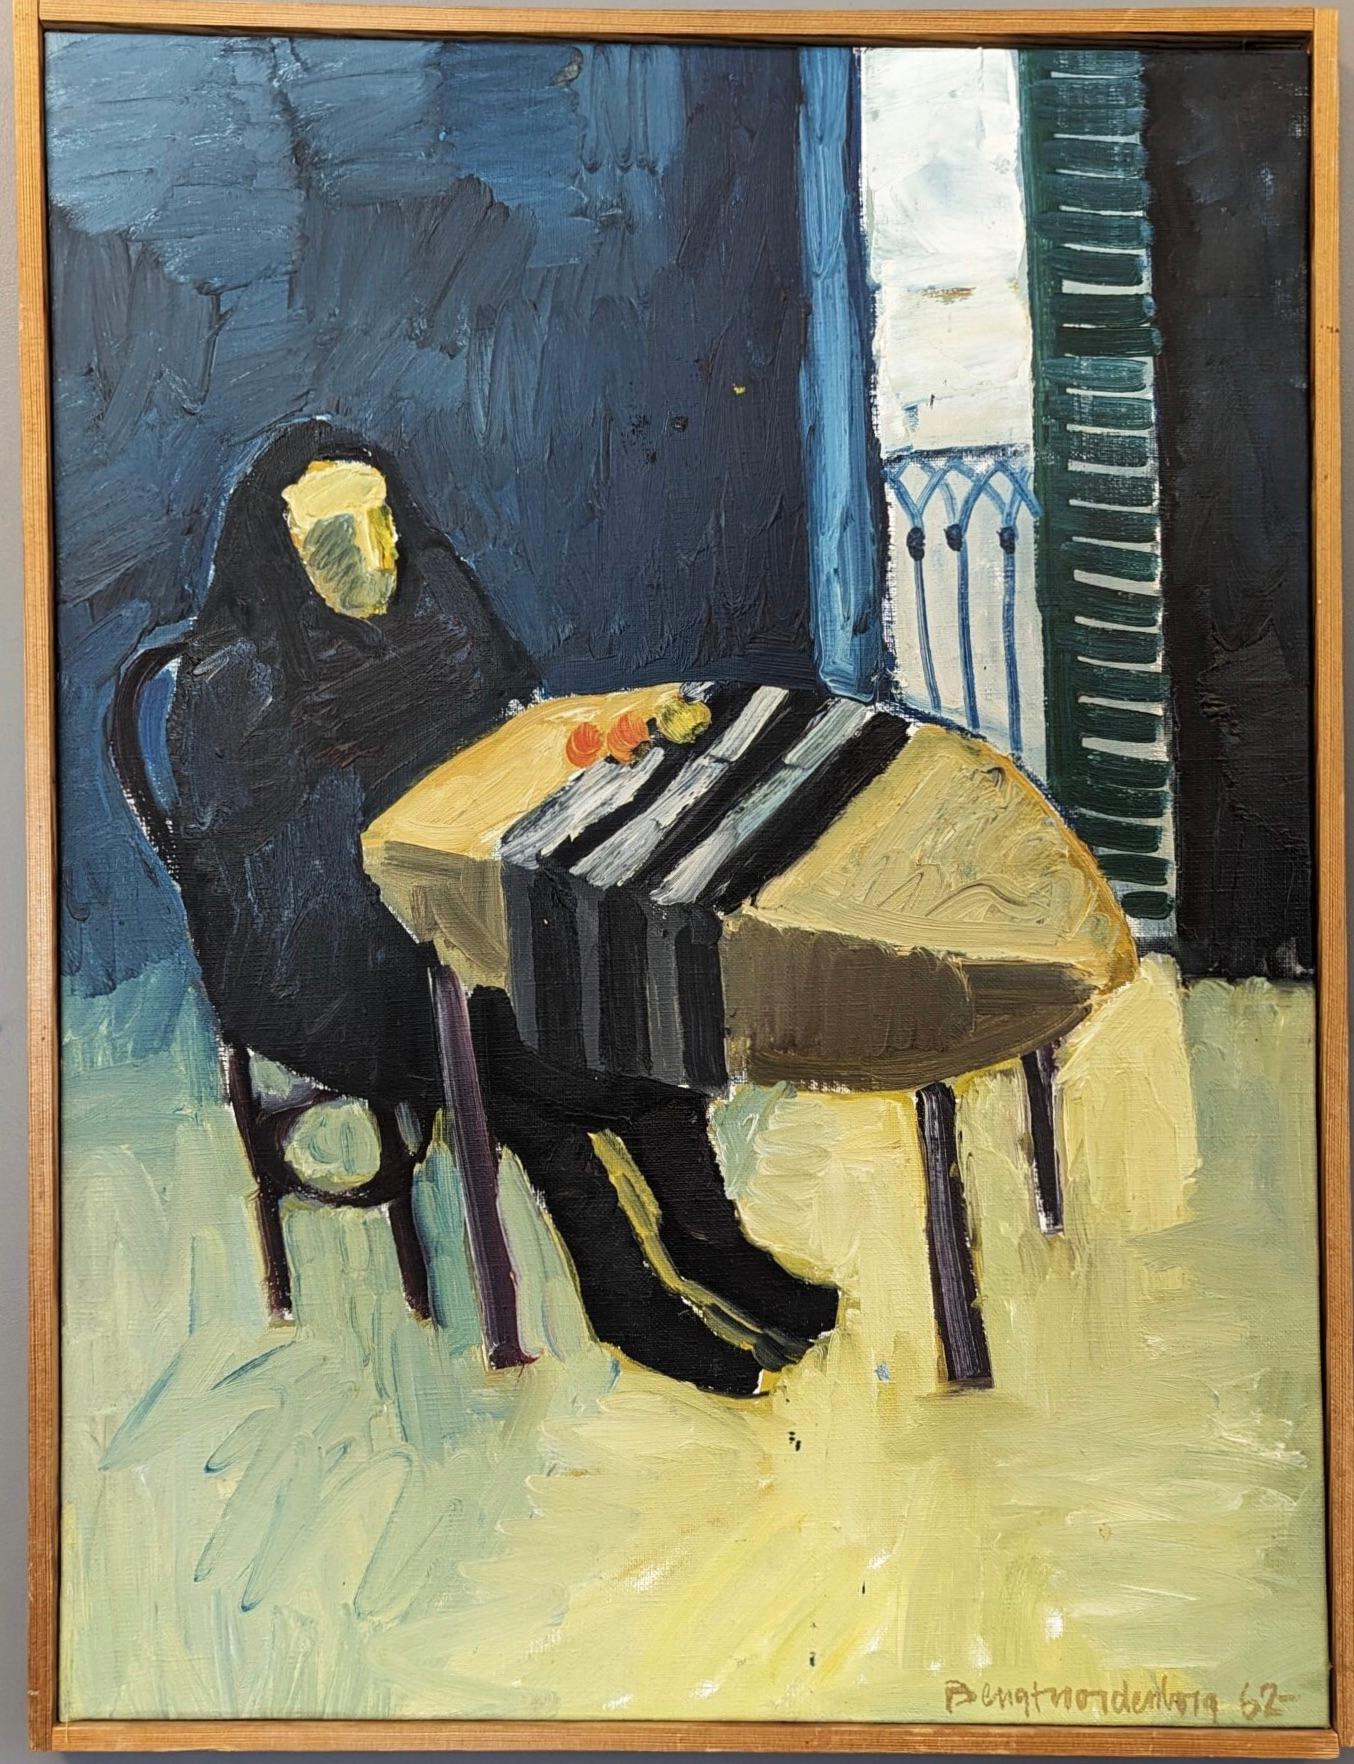 Unknown Figurative Painting - Vintage Mid-Century Swedish Modern Figurative Oil Painting - The Lonely Diner